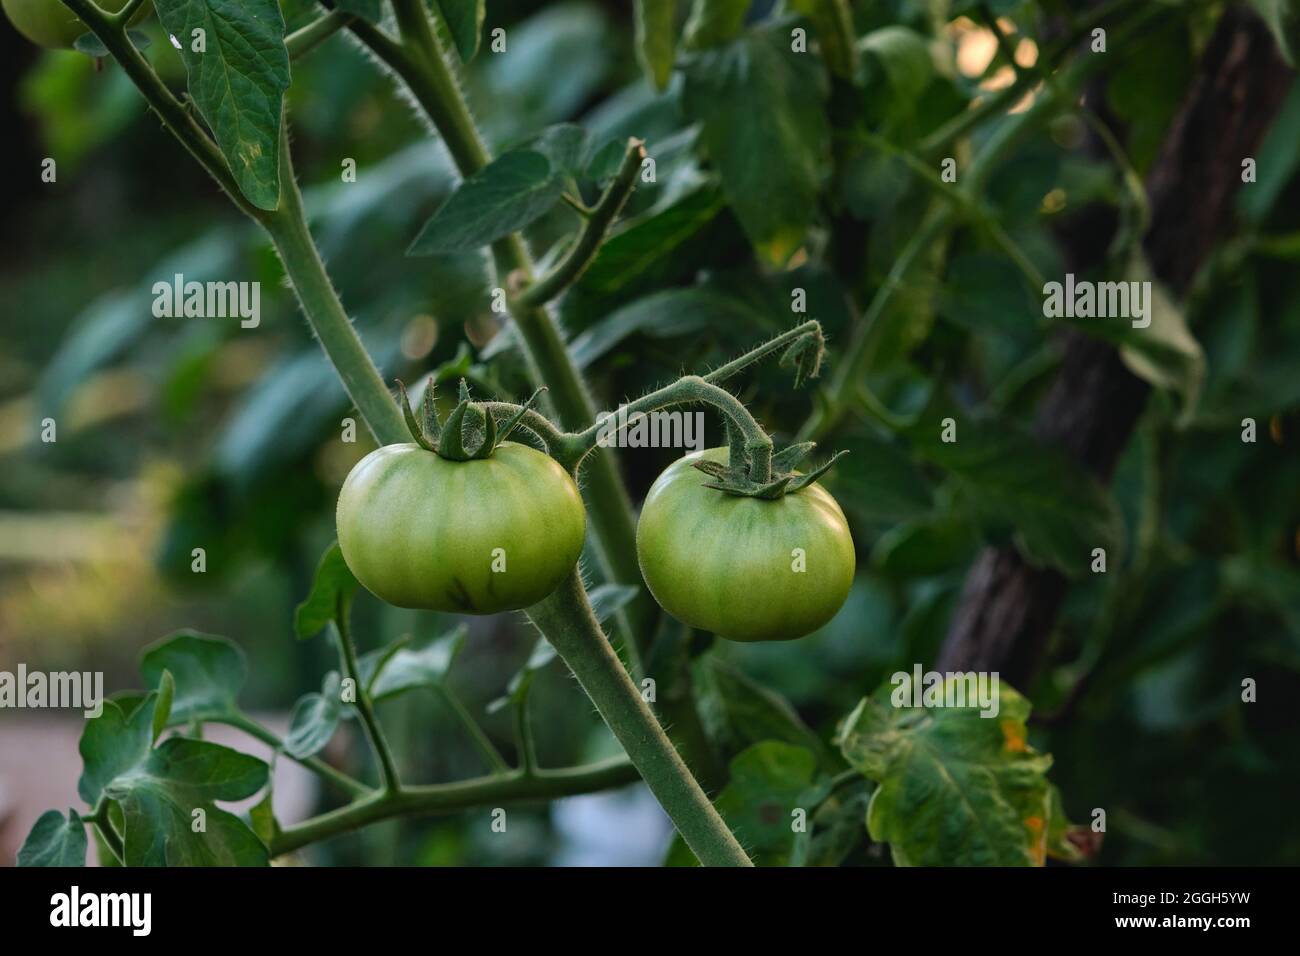 Green unripe tomato plant fruits growing in a hothouse Stock Photo